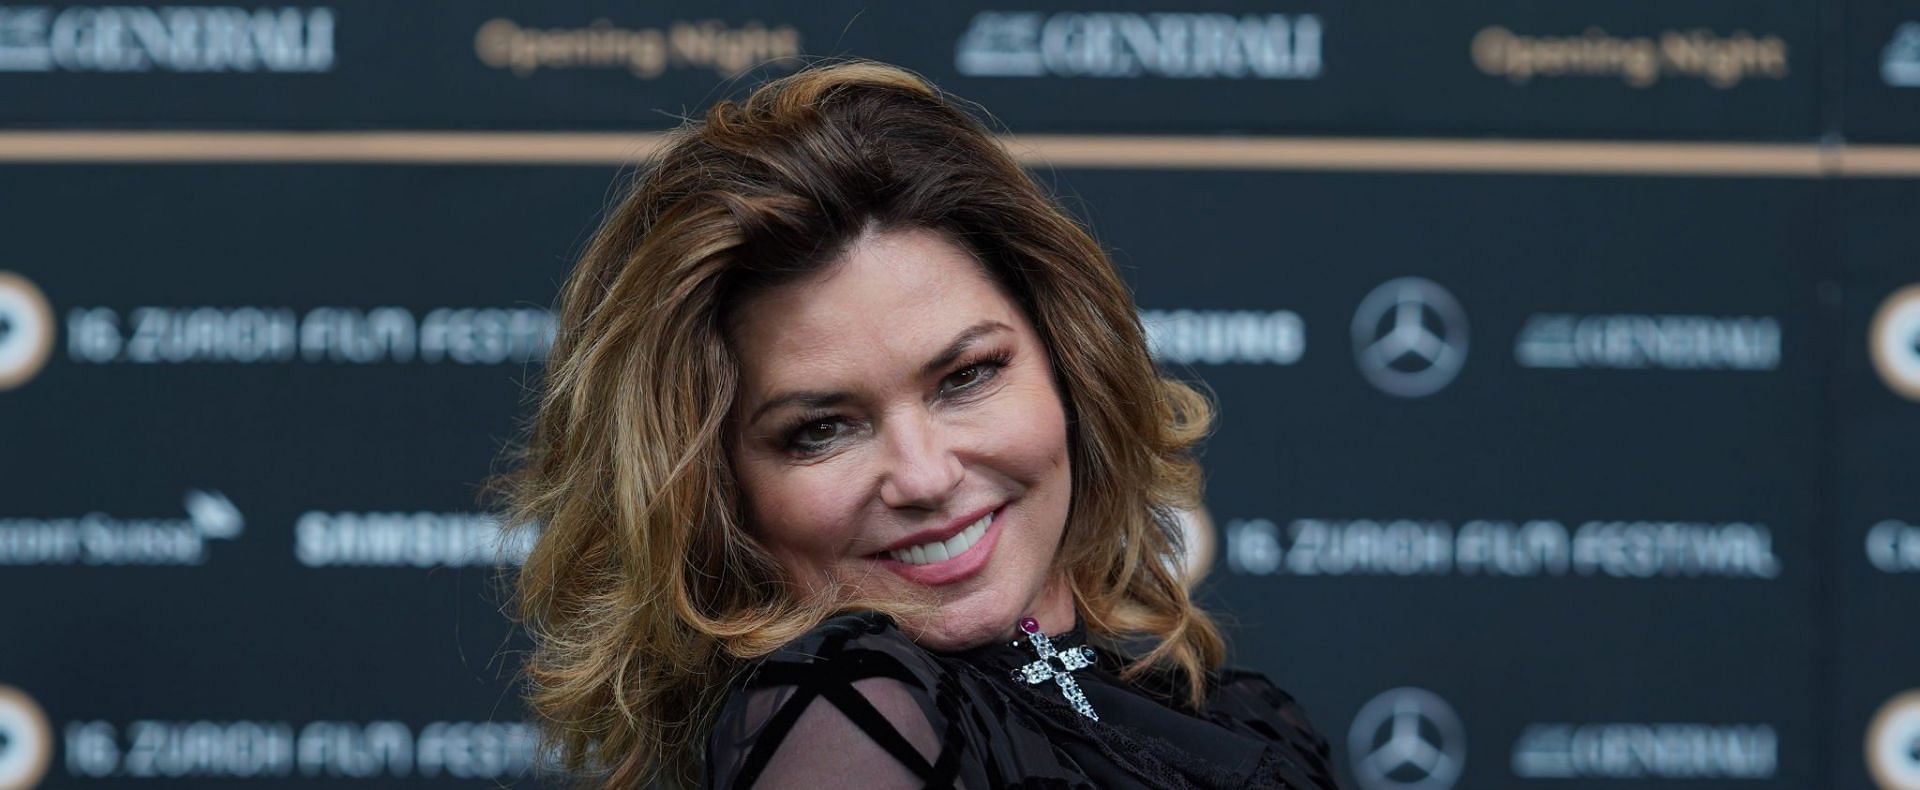 Shania Twain opened up about her divorce and remarriage (Image via Getty Images)